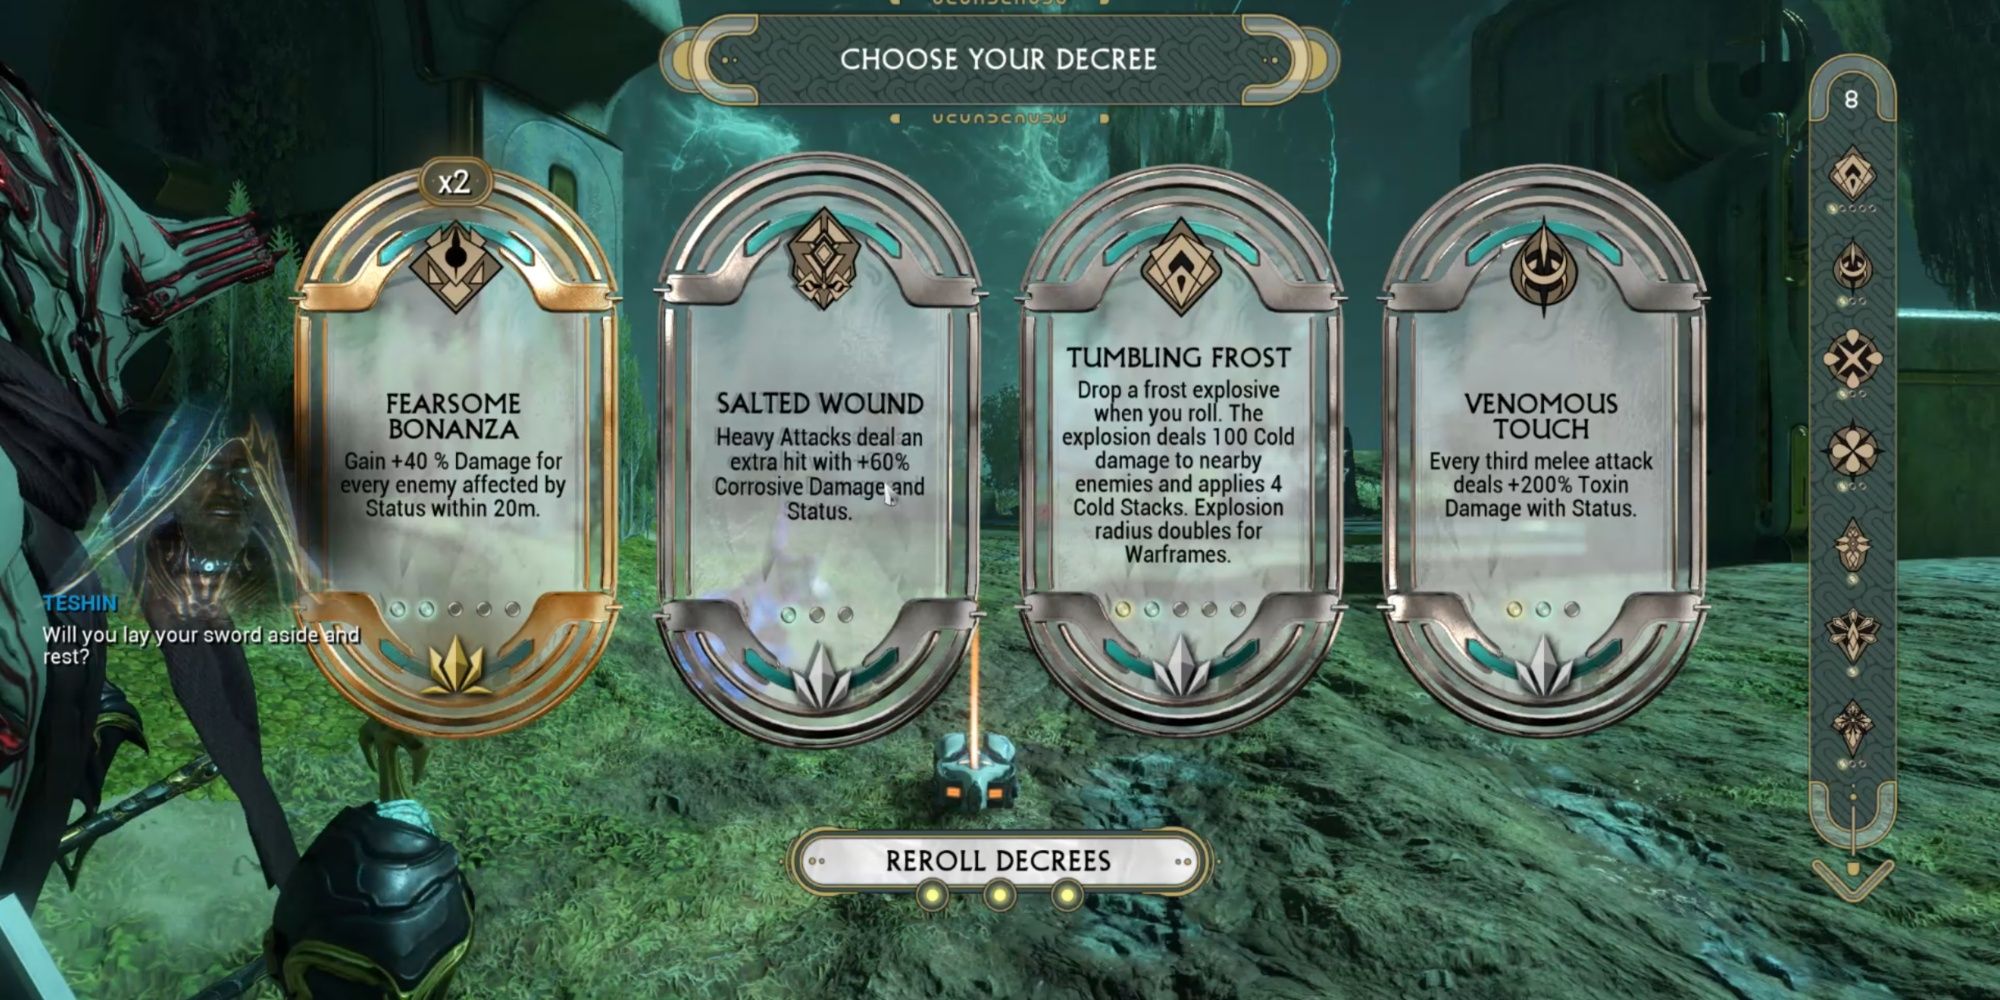 Warframe Salted Wound seen in the "Choose Your Decree" screen.